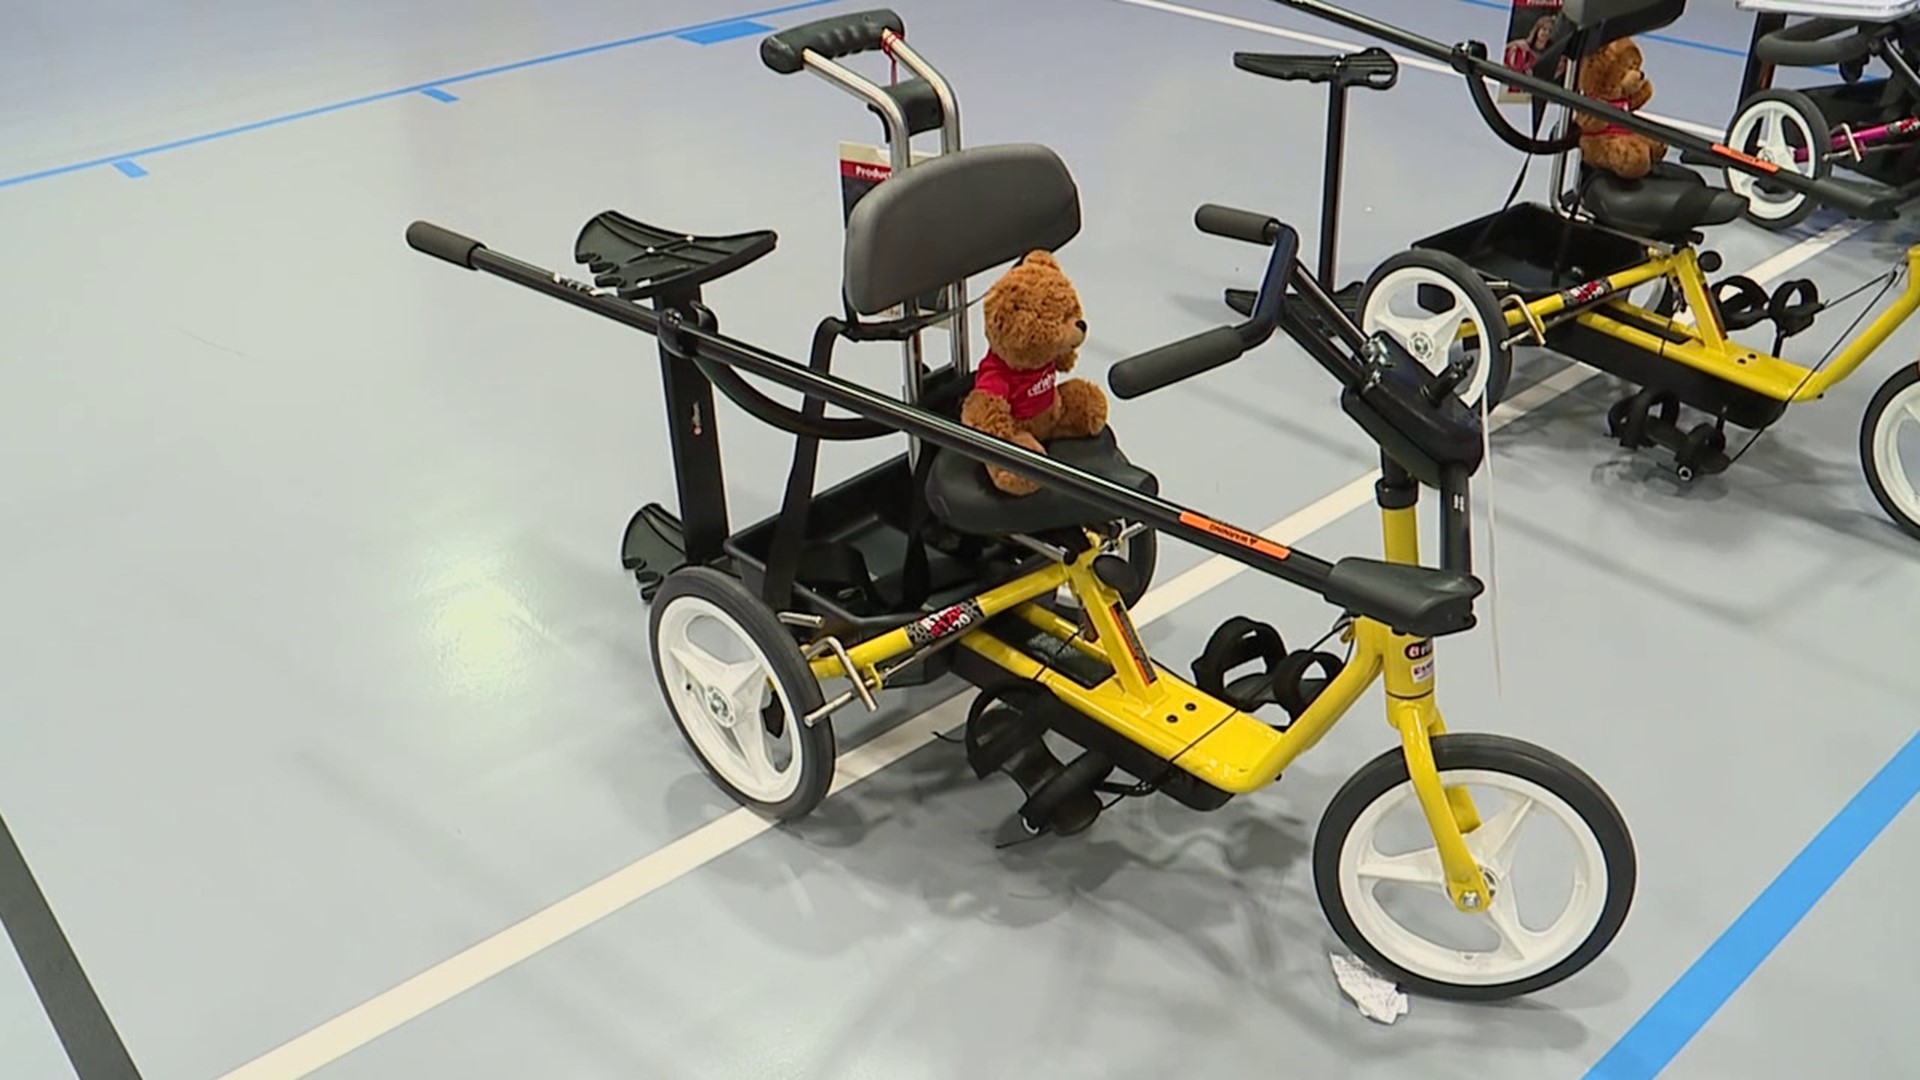 Kids with special needs got to take home a free adaptive bike.